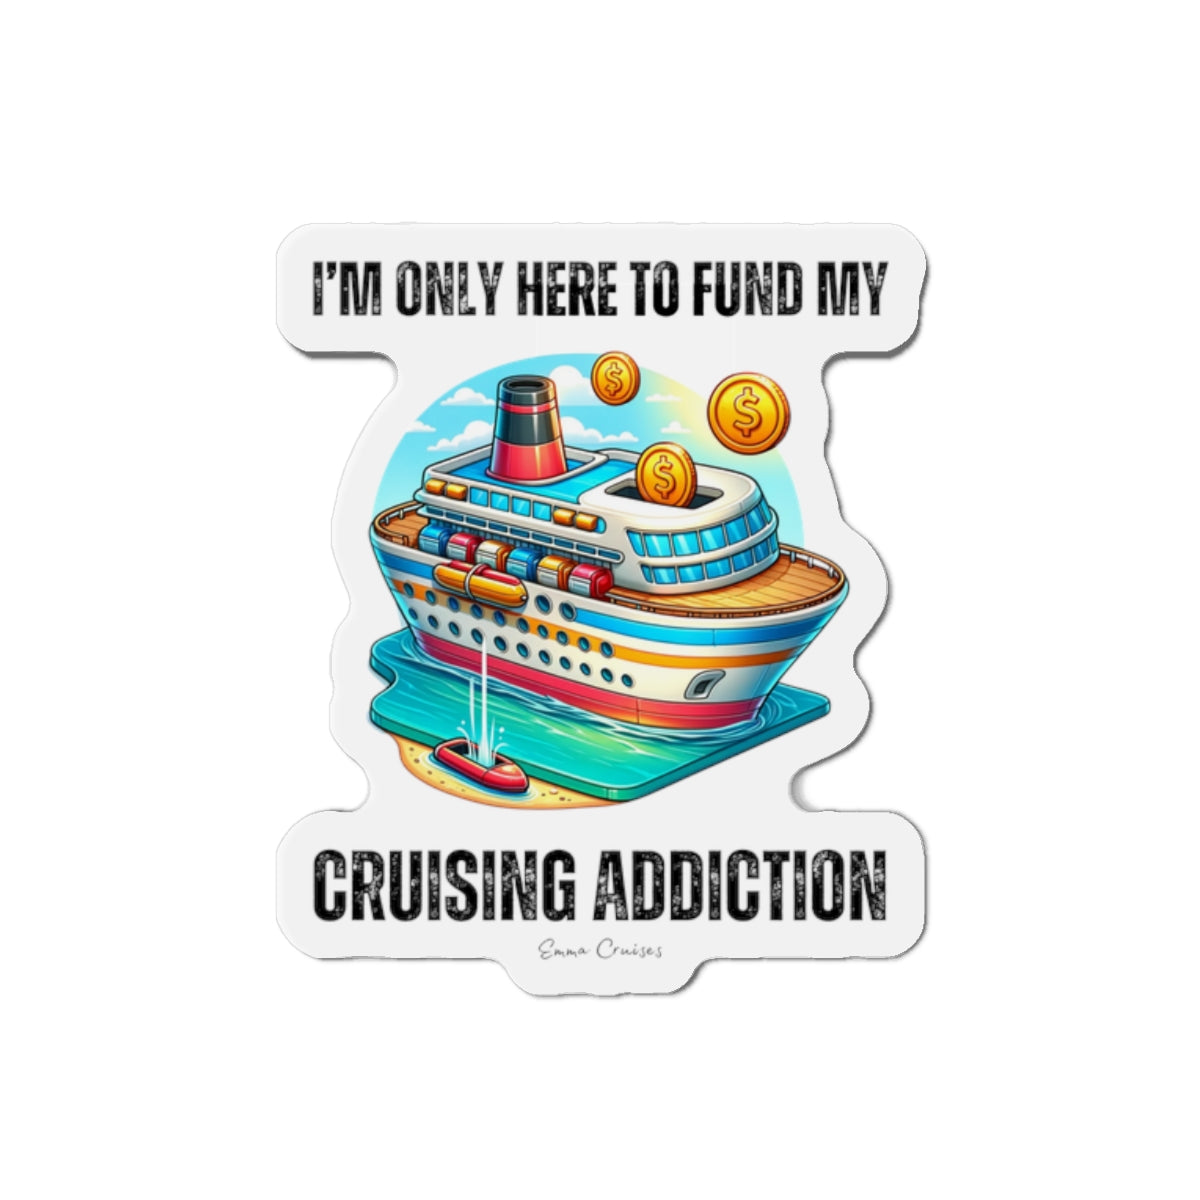 I'm Only Here to Fund My Cruising Addiction - Magnet